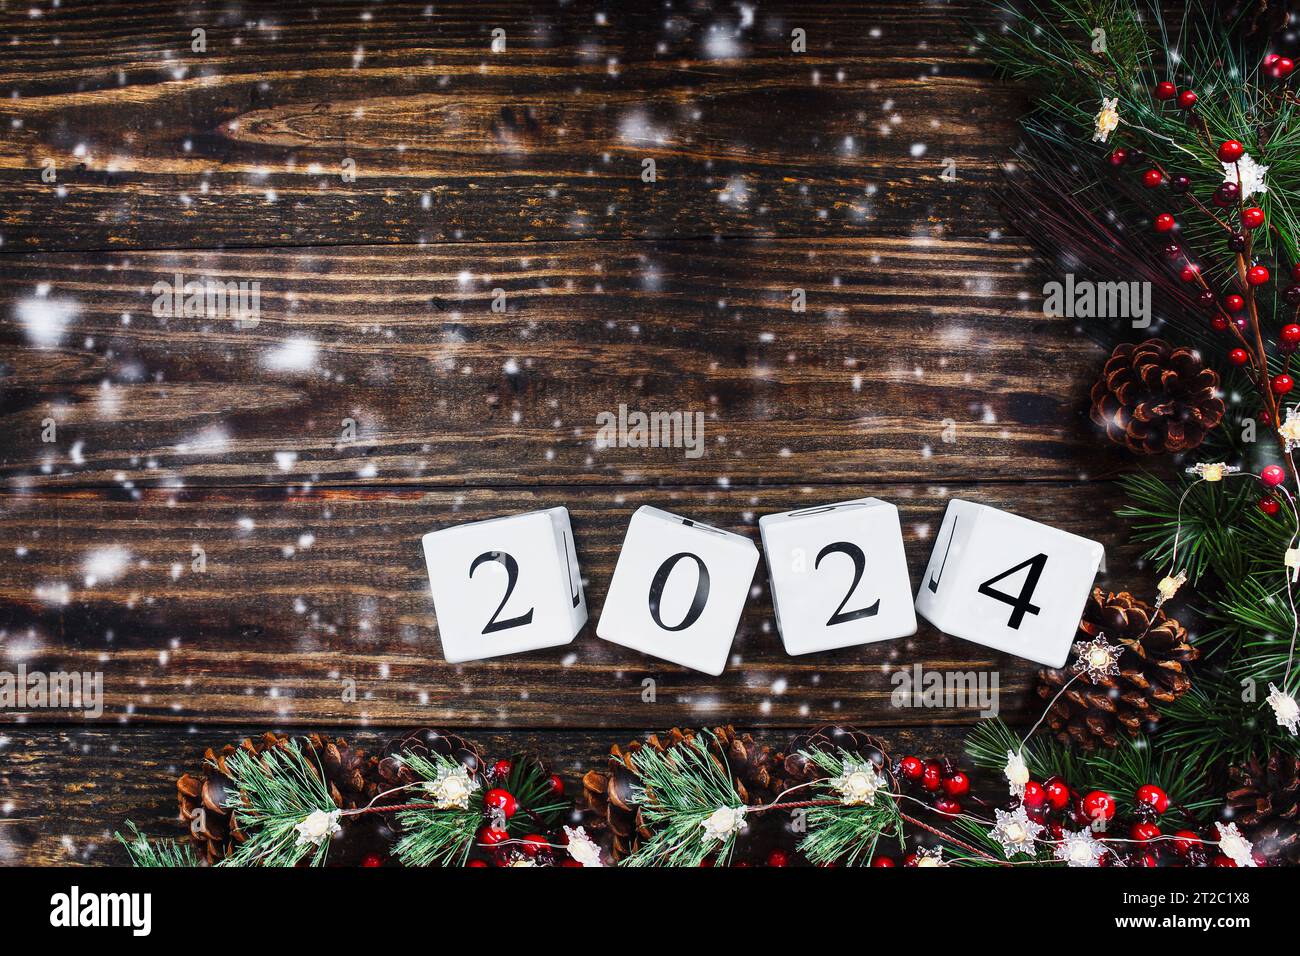 New Year's 2024 wood calendar blocks. Christmas tree lights, pine branches, red winter berries and snow over wooden table background. Top view with co Stock Photo